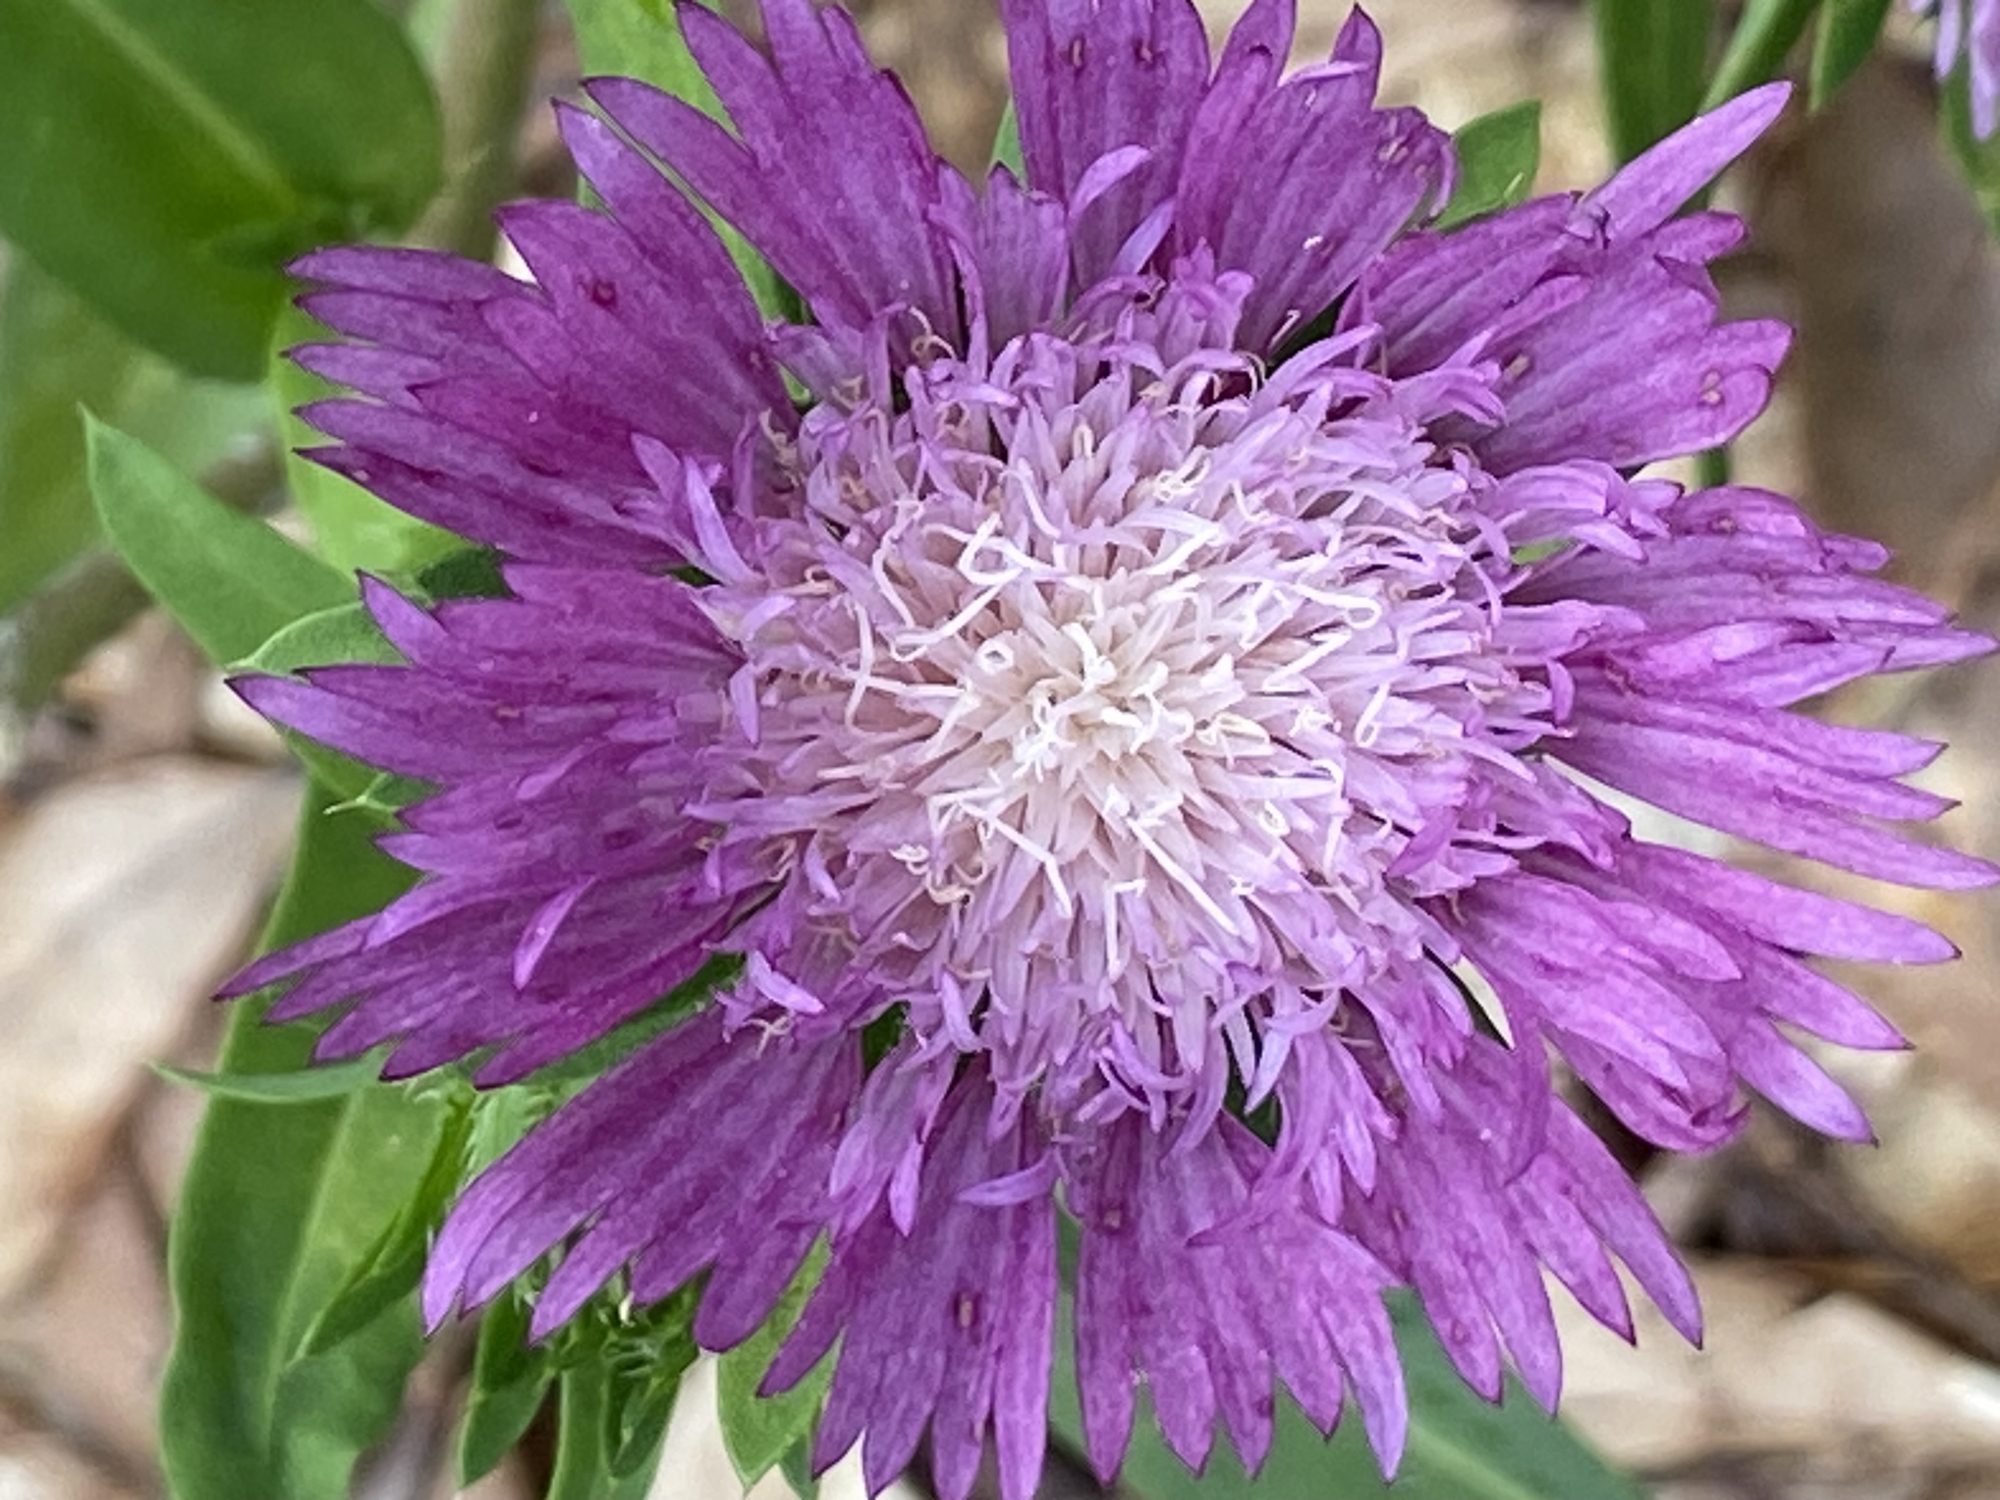 Stokes aster. Photo by Ruth Ann Grissom.